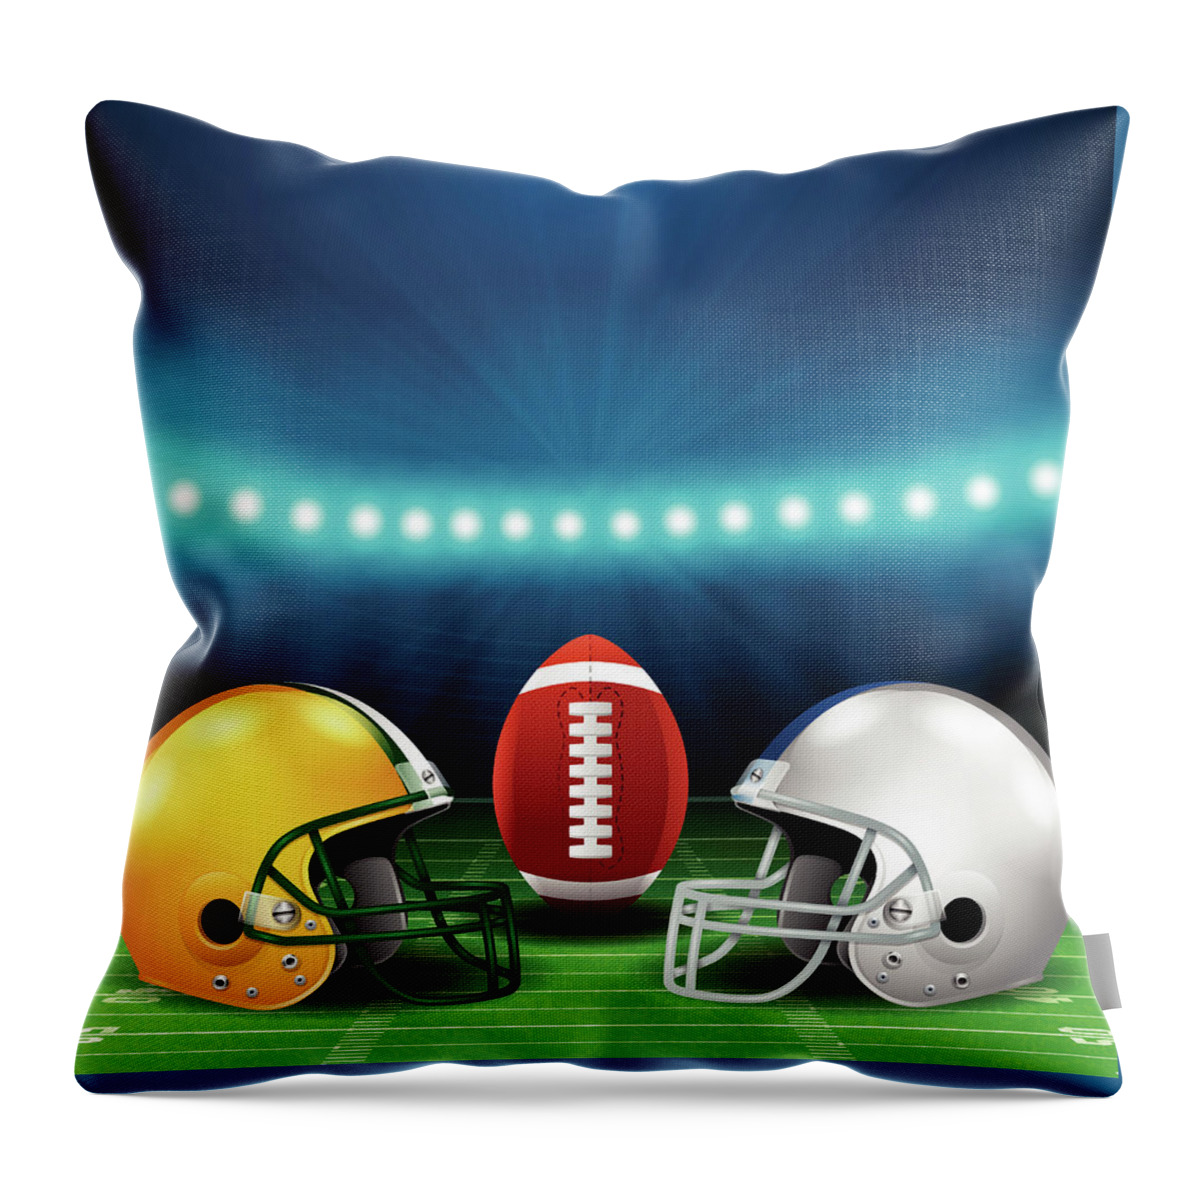 Sports Helmet Throw Pillow featuring the digital art Football Background by Filo